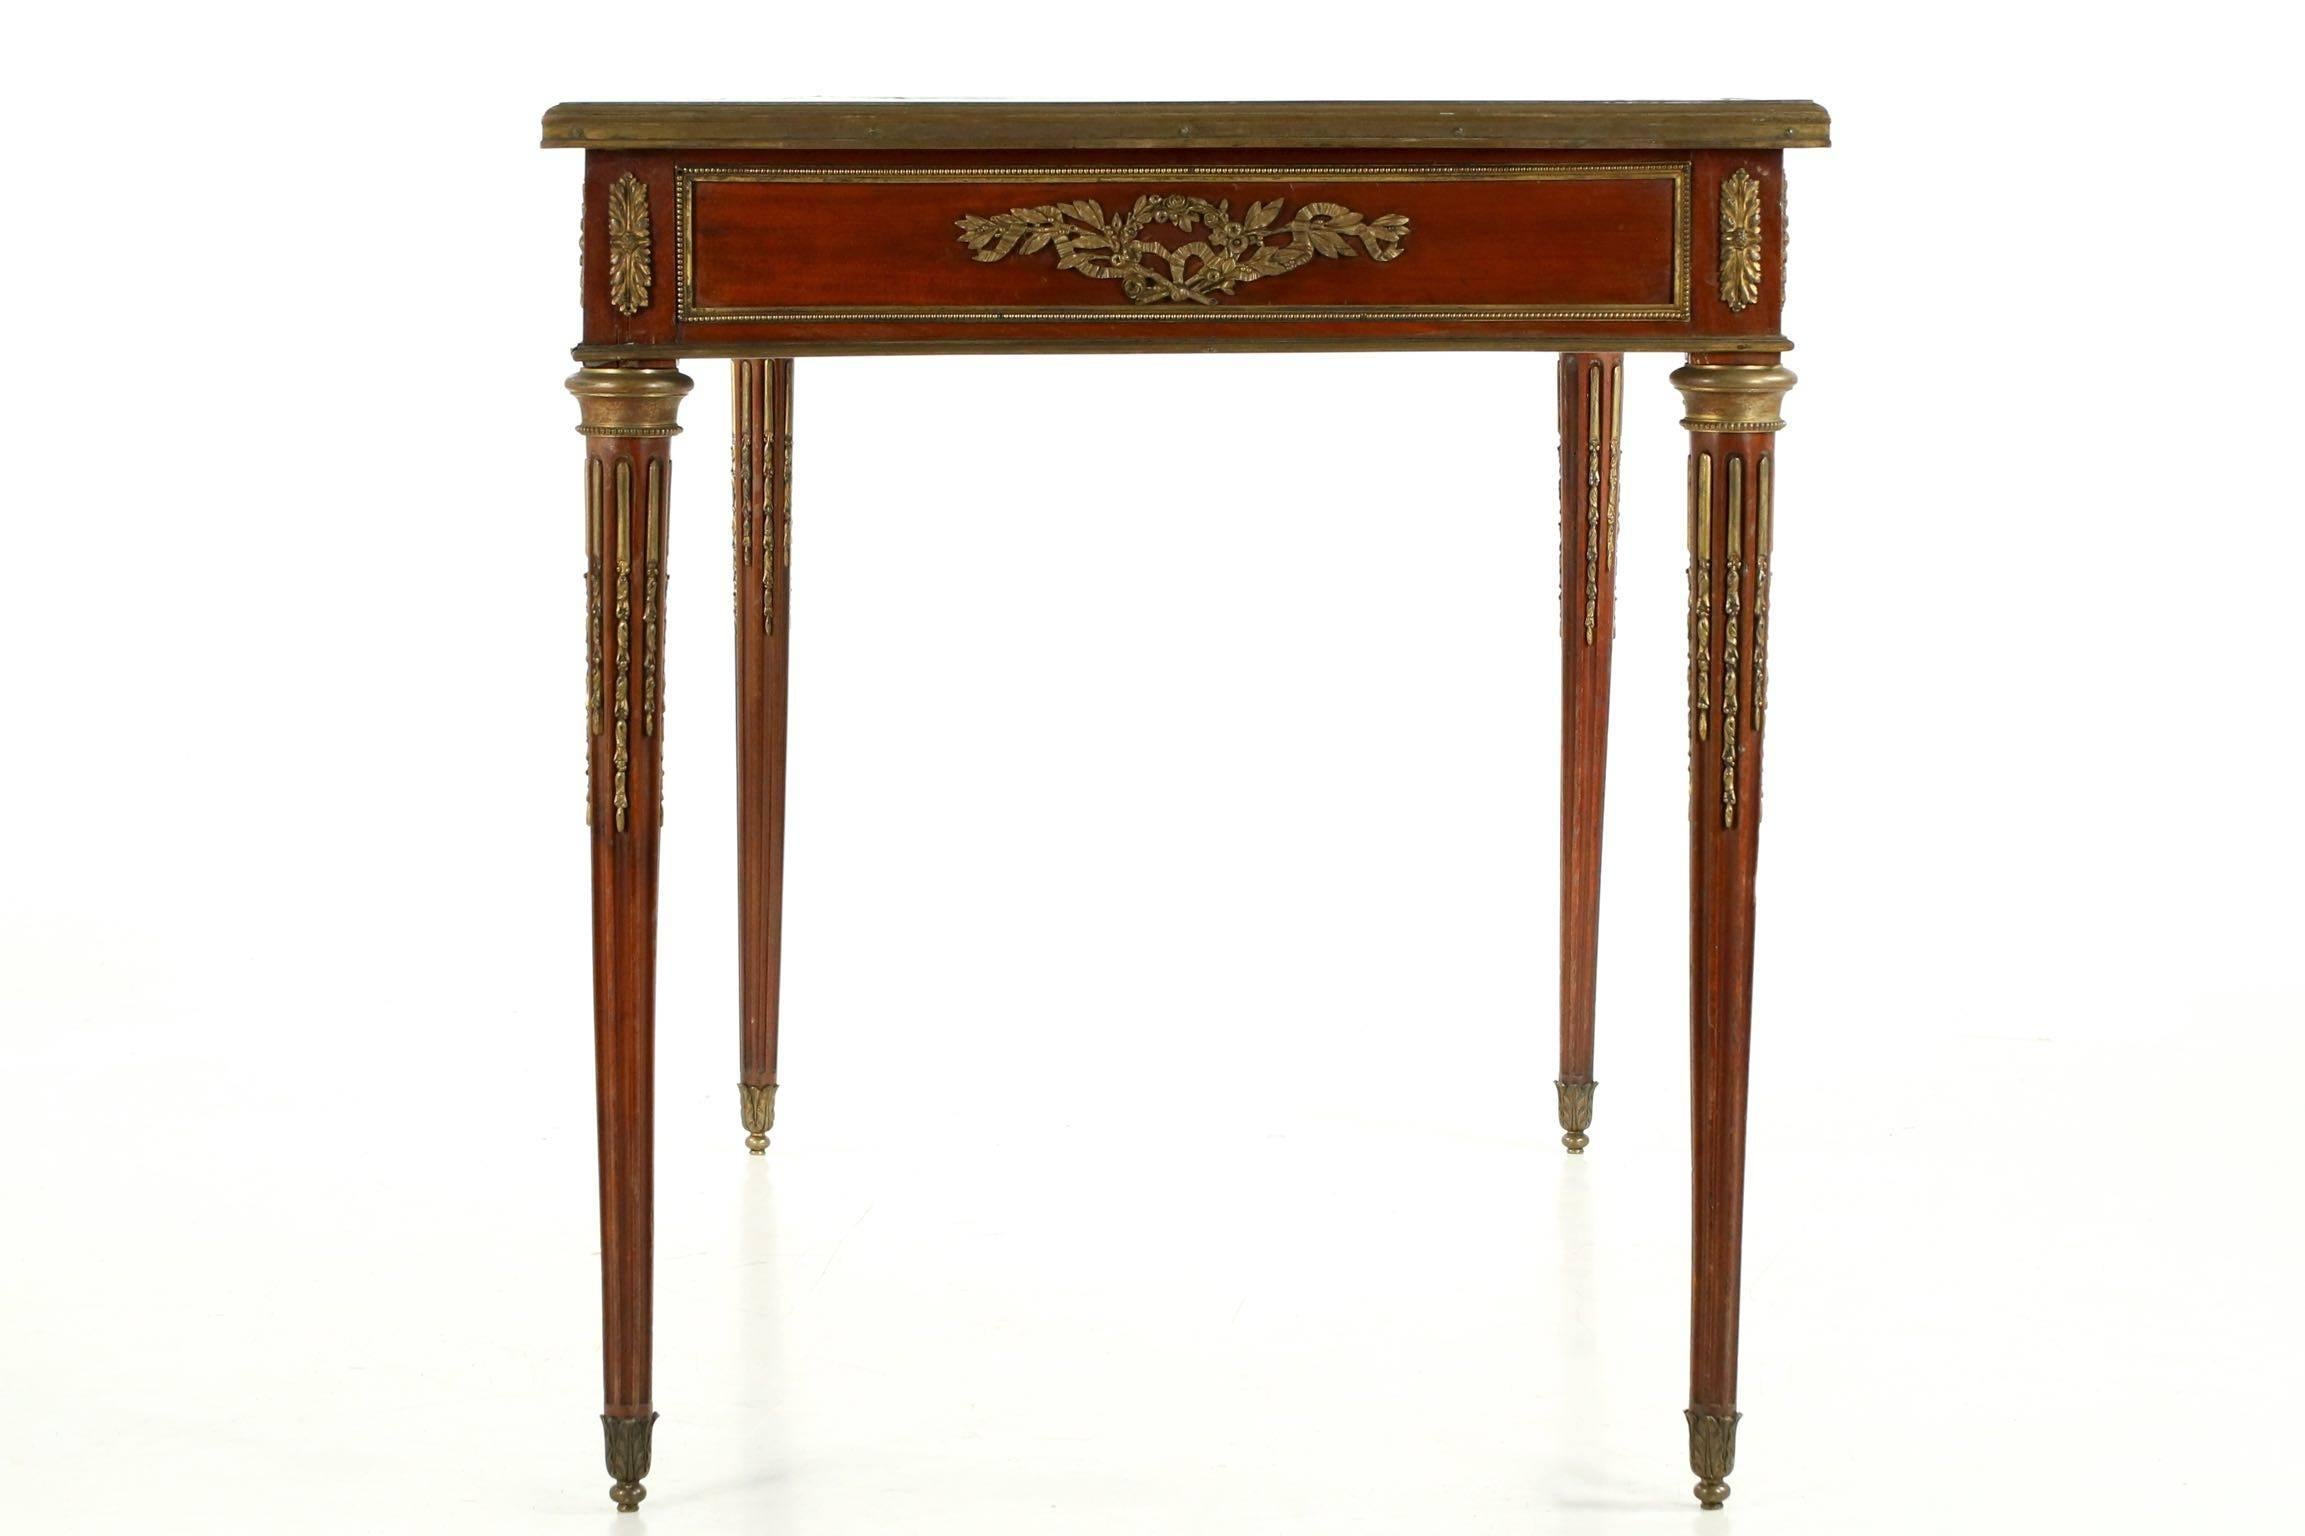 19th Century French Louis XVI Style Mahogany Leather Top Antique Writing Desk (Französisch)